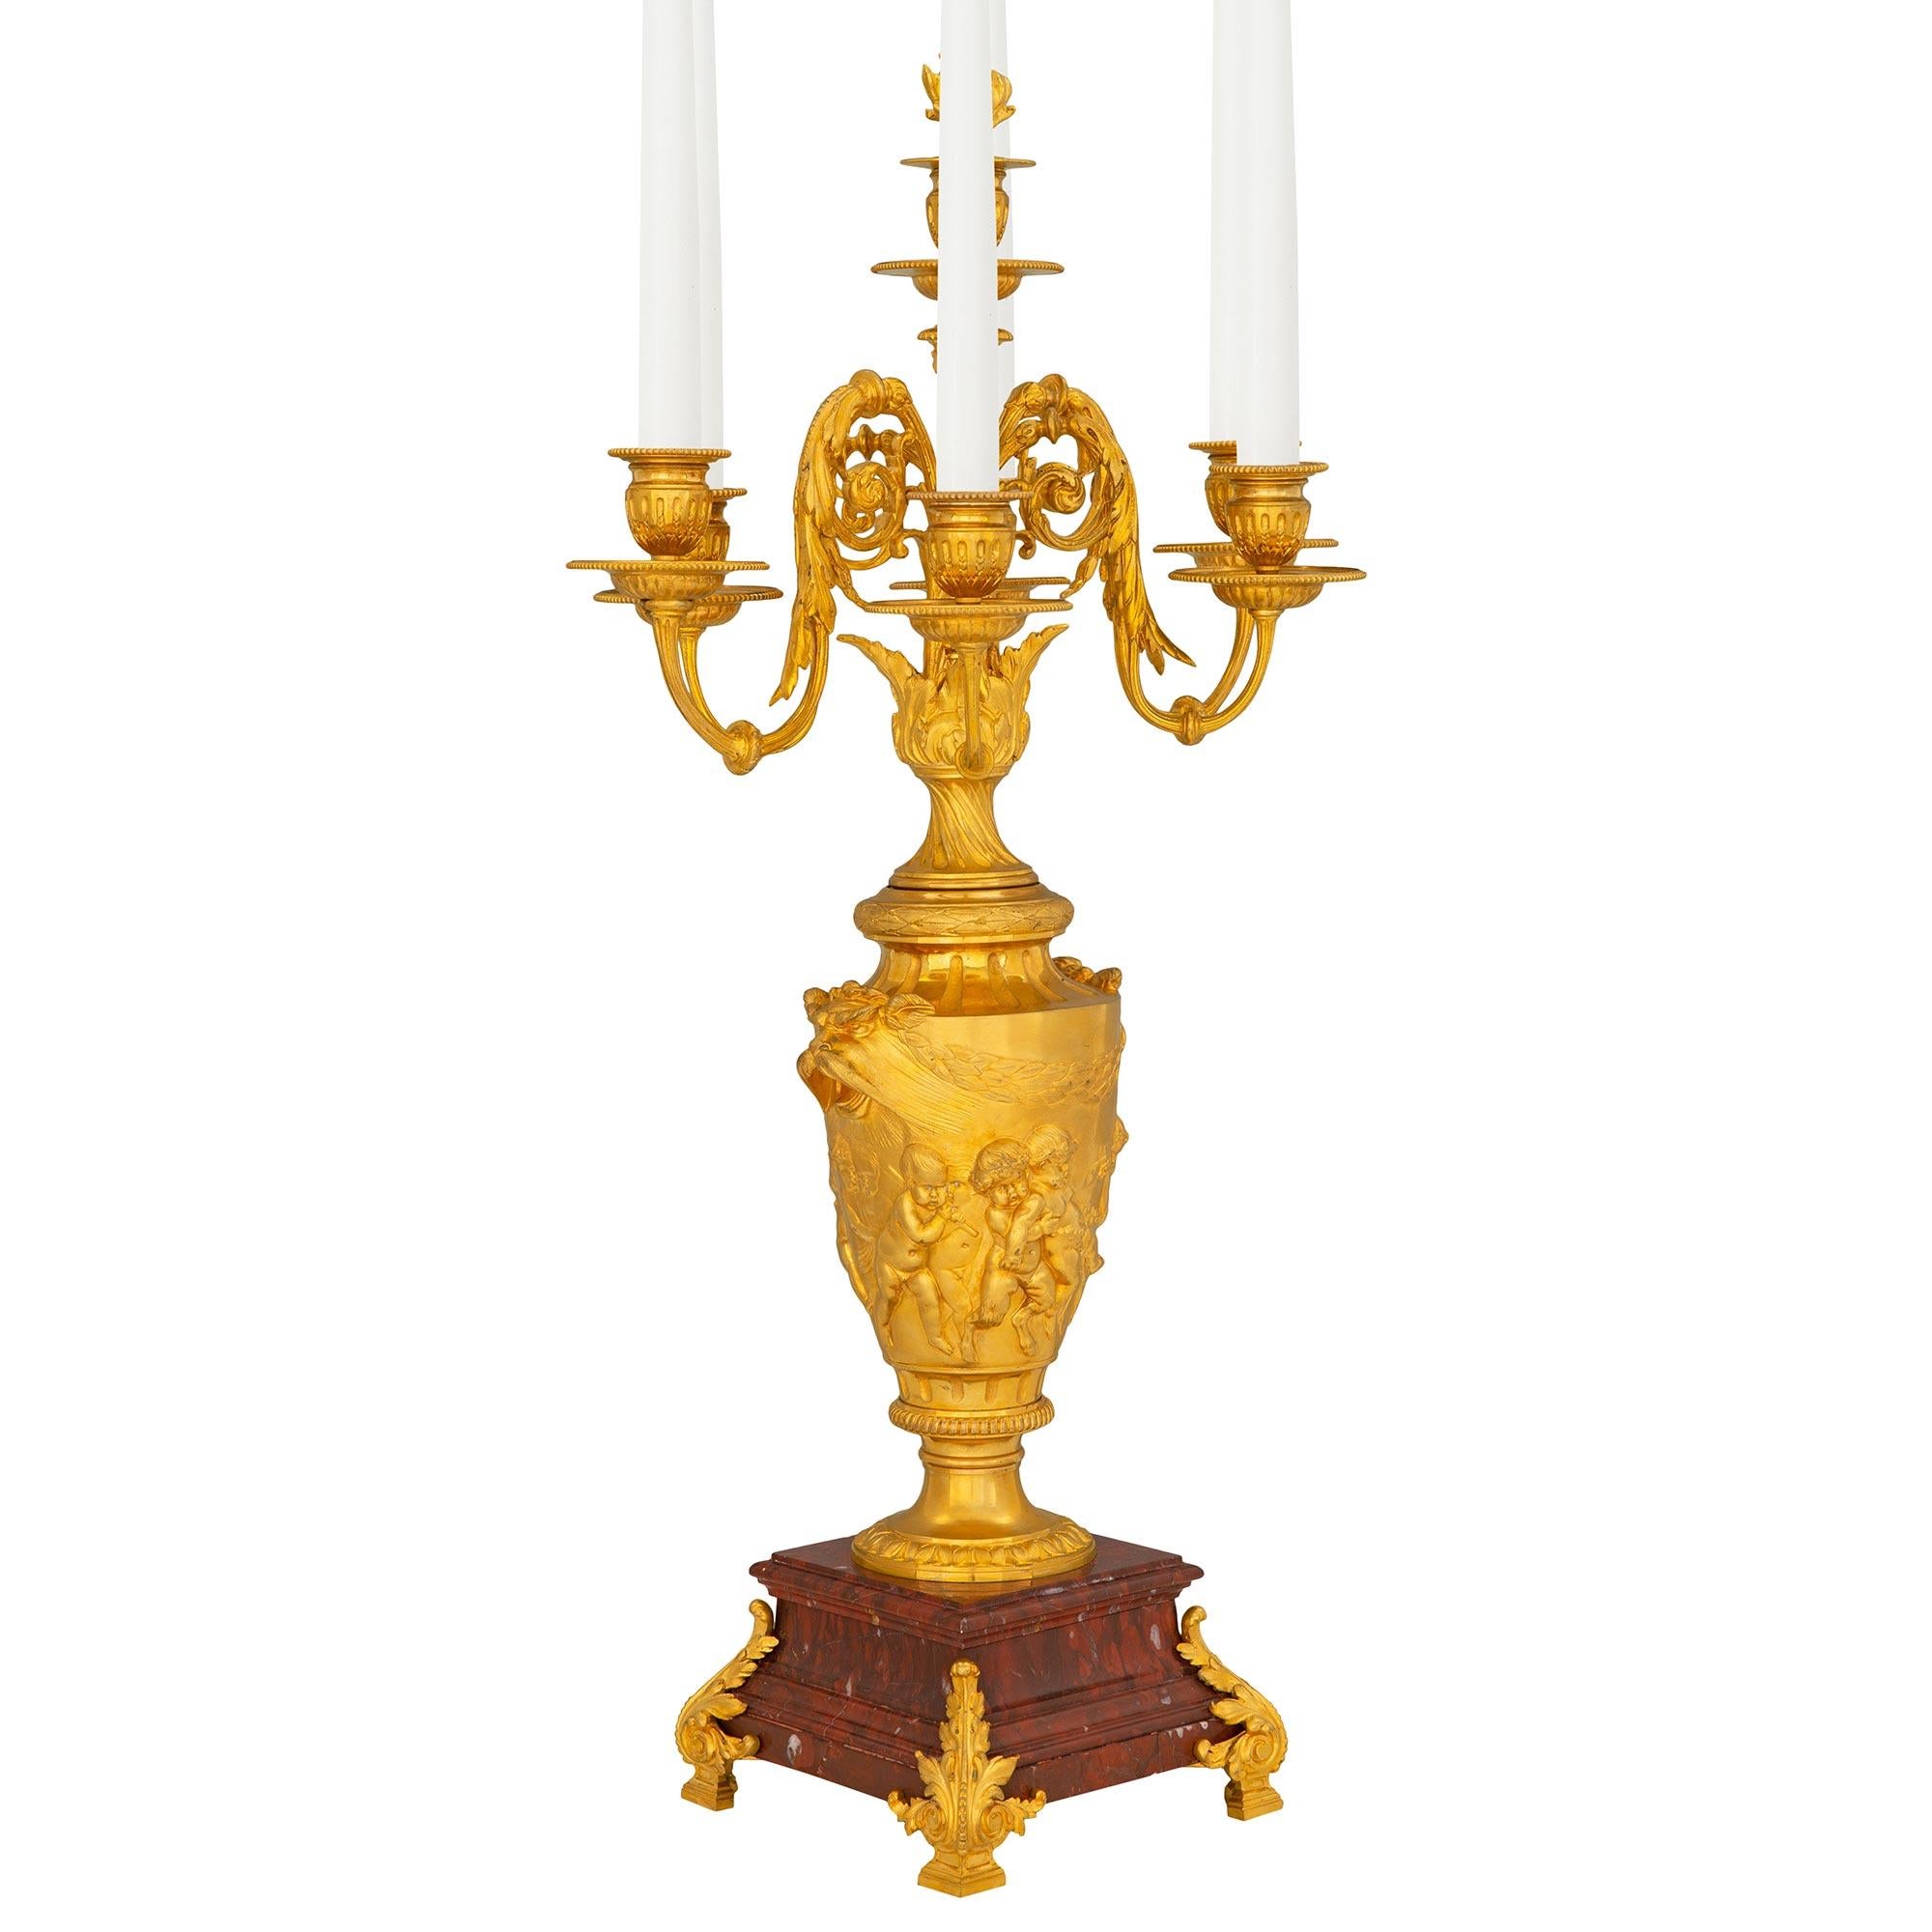 An exquisite pair of French 19th century Louis XVI st. Belle Époque period ormolu and Rouge Griotte marble candelabras, attributed to F. Barbedienne. Each seven arm candelabra is raised by elegant ormolu supports with Fine block feet and richly